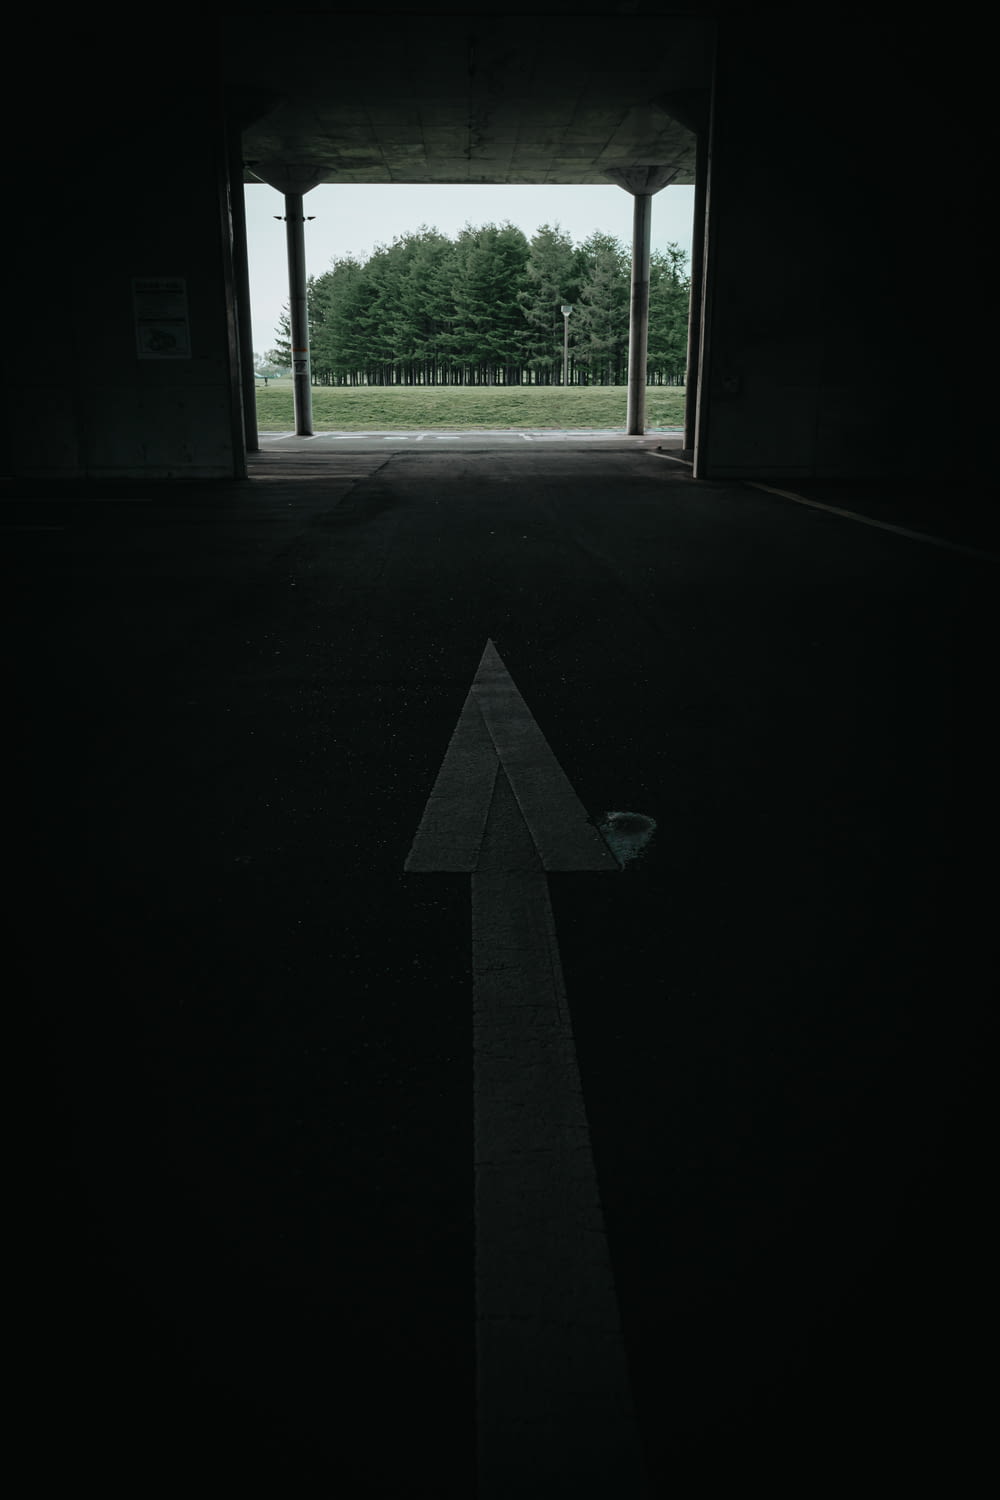 an empty parking garage with an arrow painted on the floor